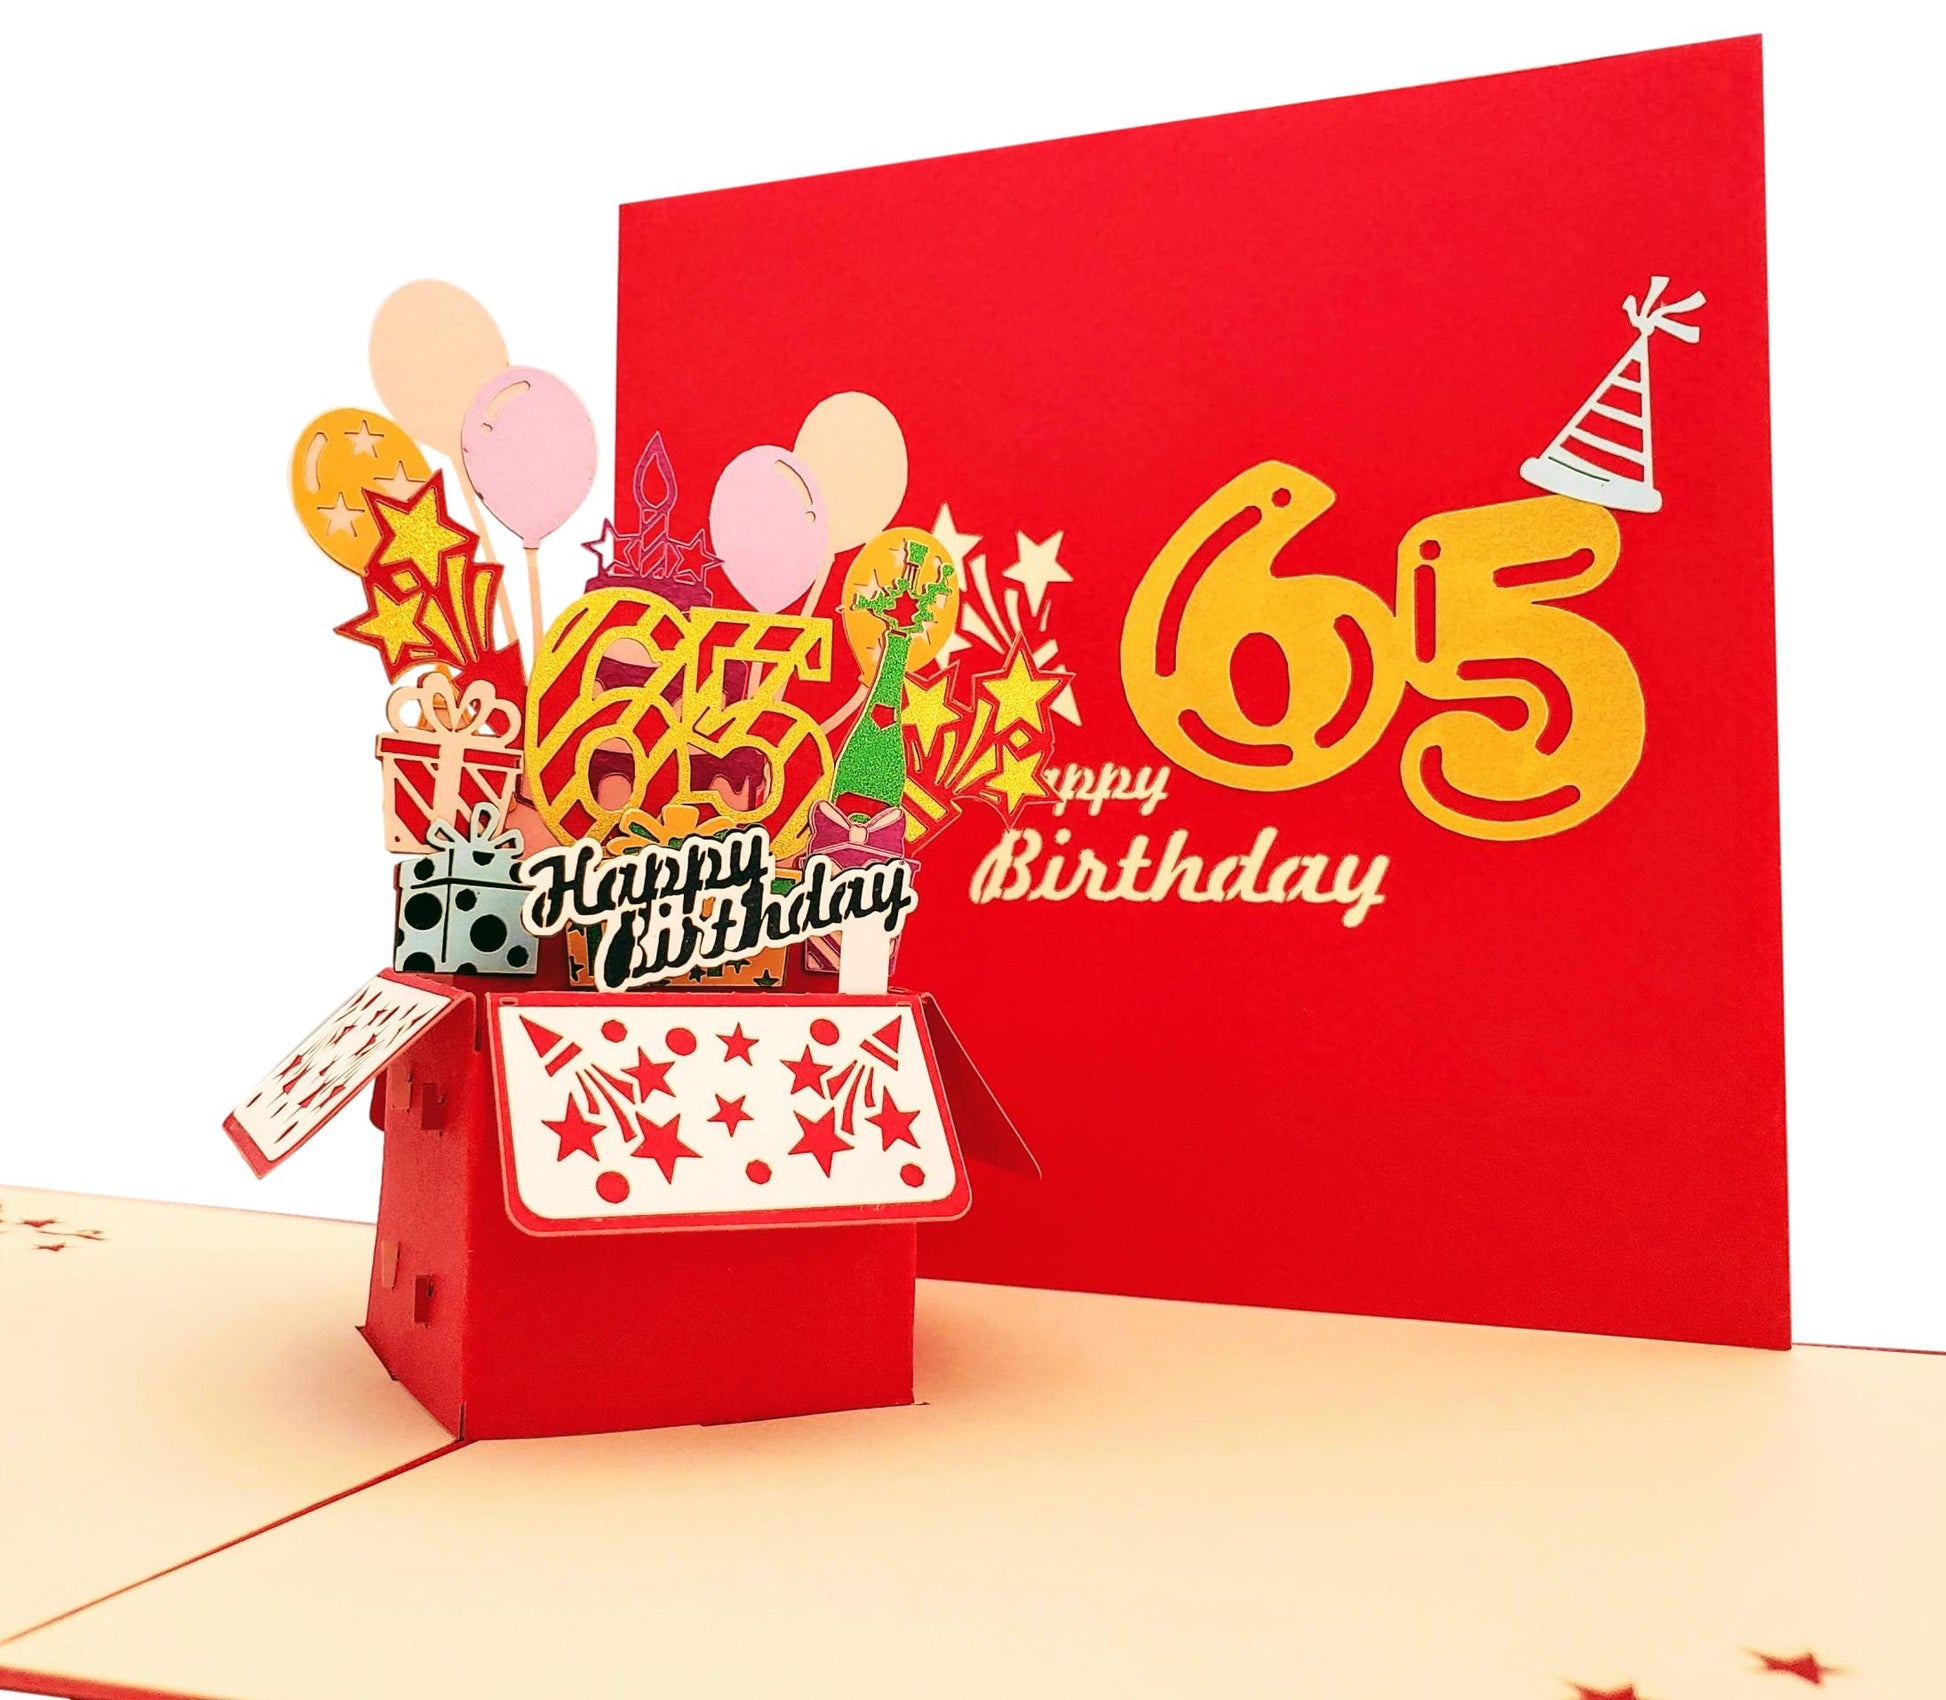 Happy 65th Birthday Red Party Box 3D Pop Up Greeting Card - Birthday - Fun - Milestone - Special Day - iGifts And Cards